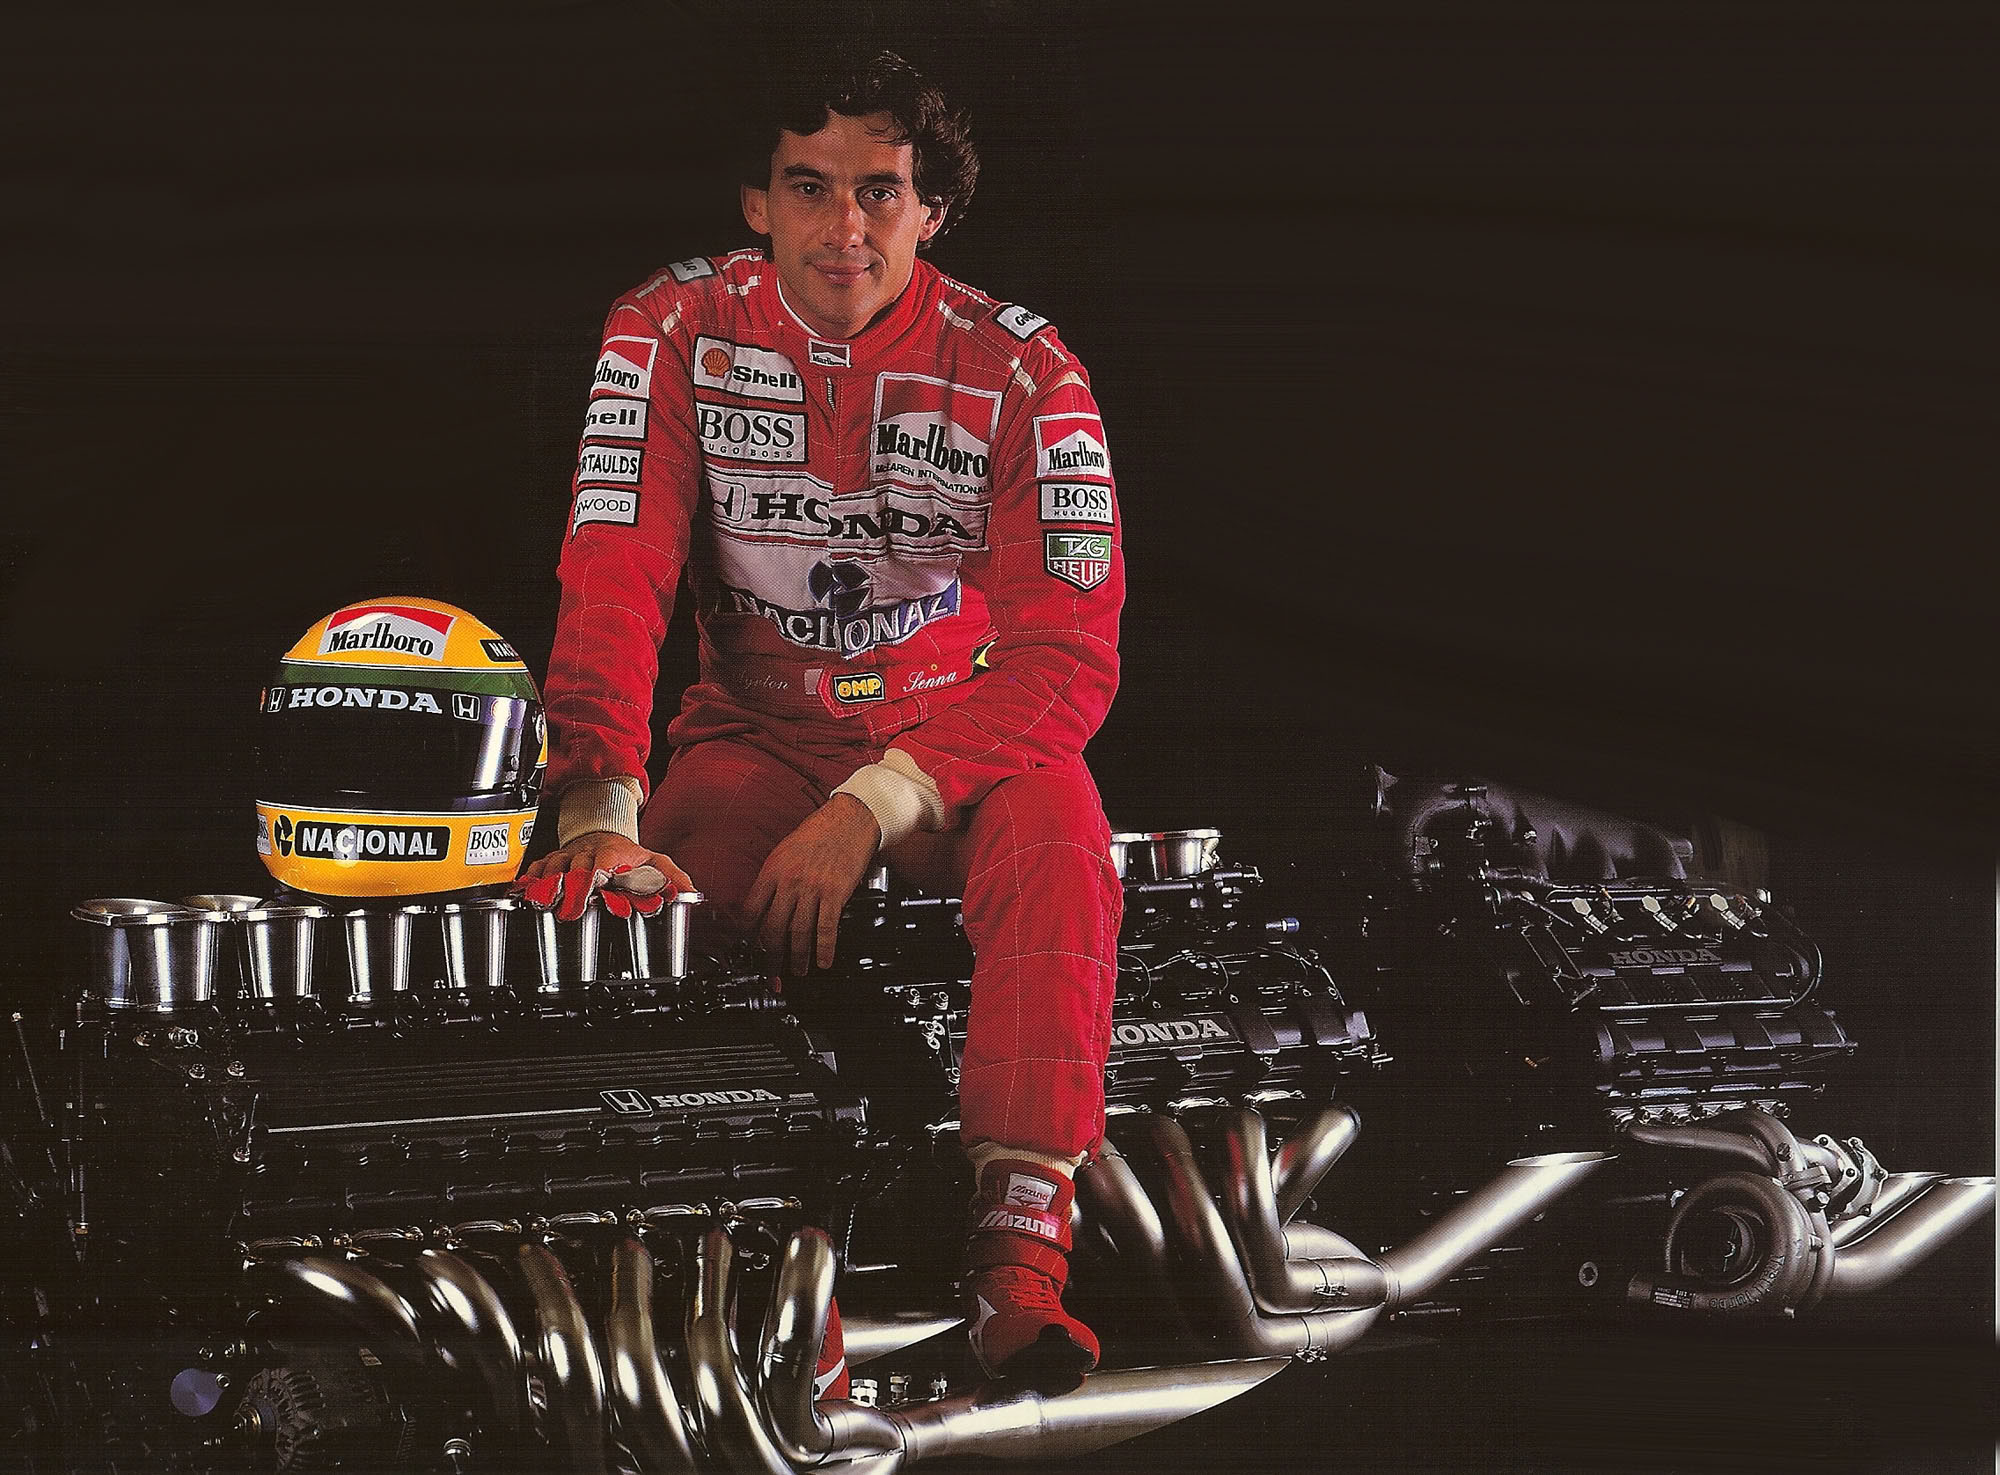 Happy birthday to the G.O.A.T.
Ayrton Senna would\ve been 58 today. 